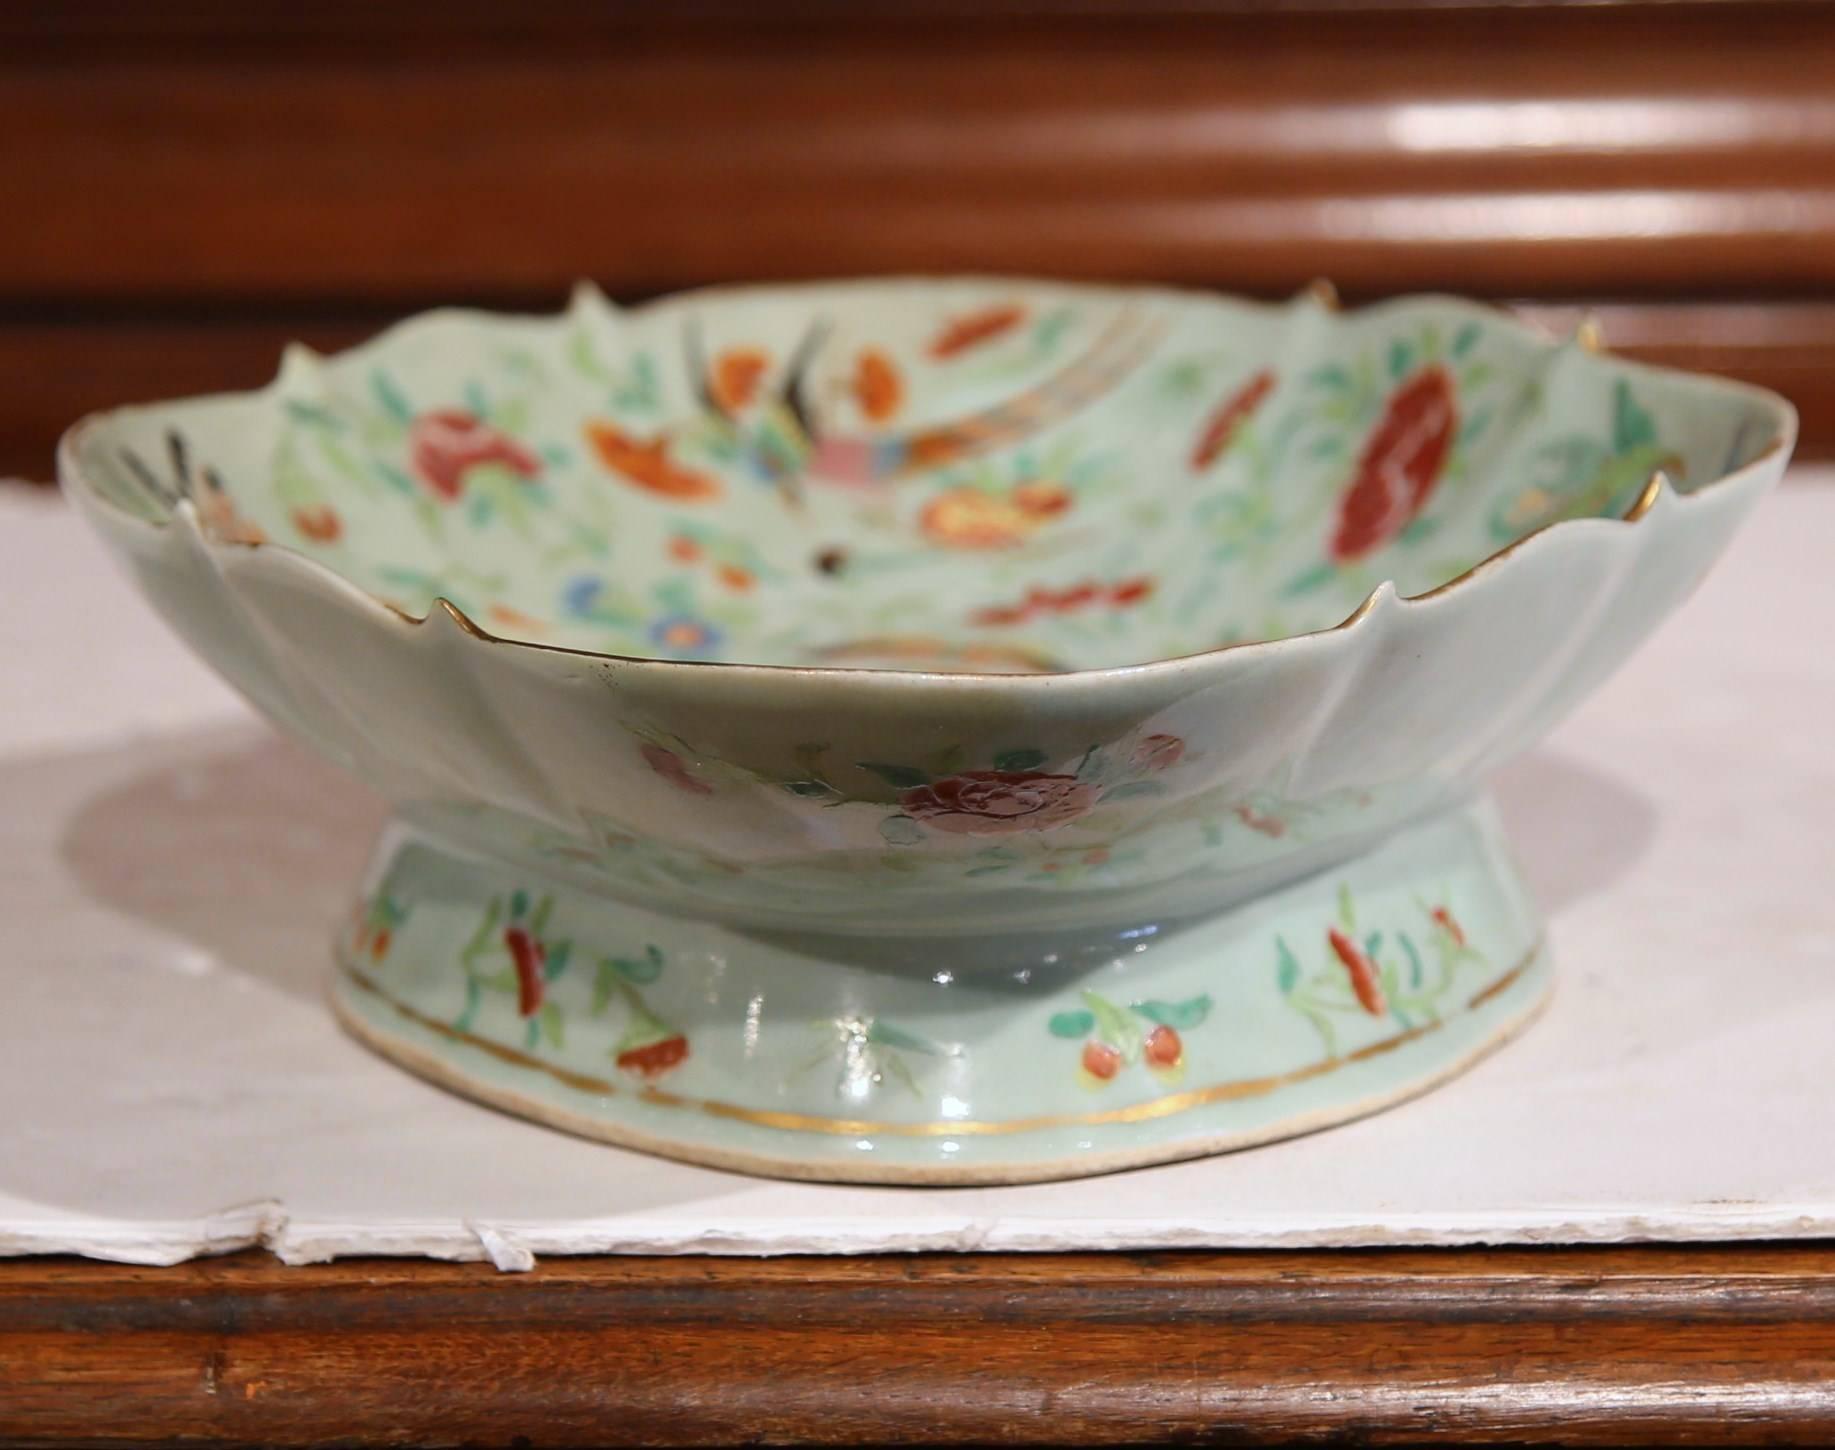 19th Century Chinese Hand-Painted Porcelain Dish with Peacocks and Butterflies 1